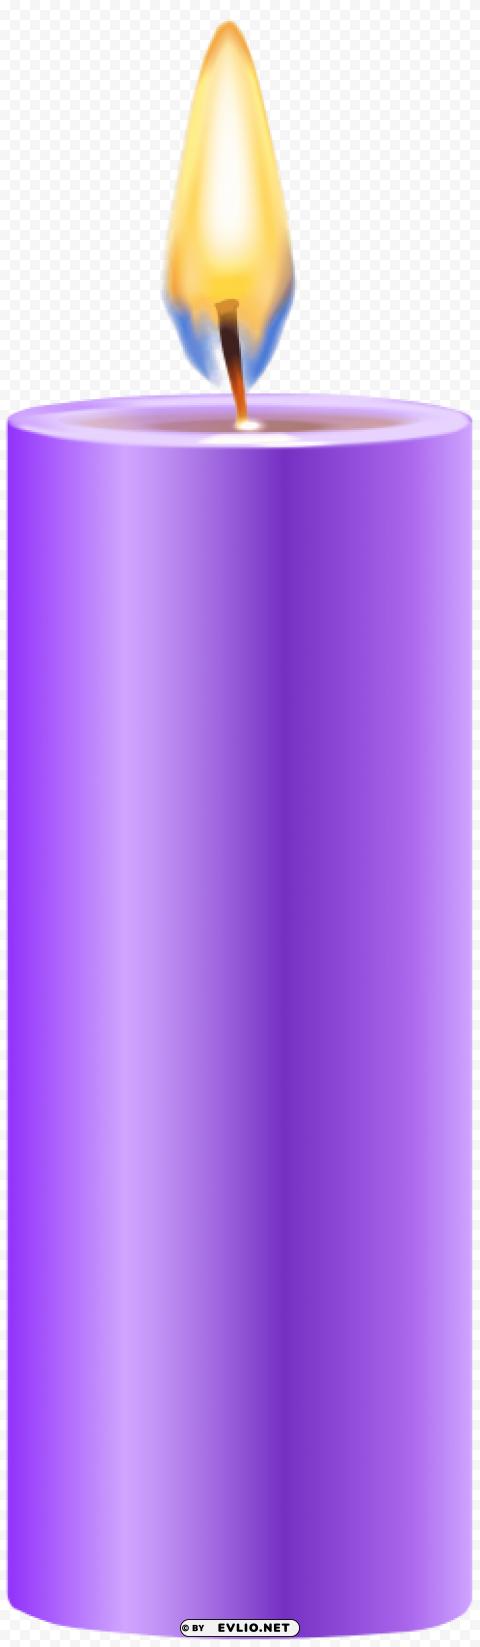 purple candle HighQuality Transparent PNG Element